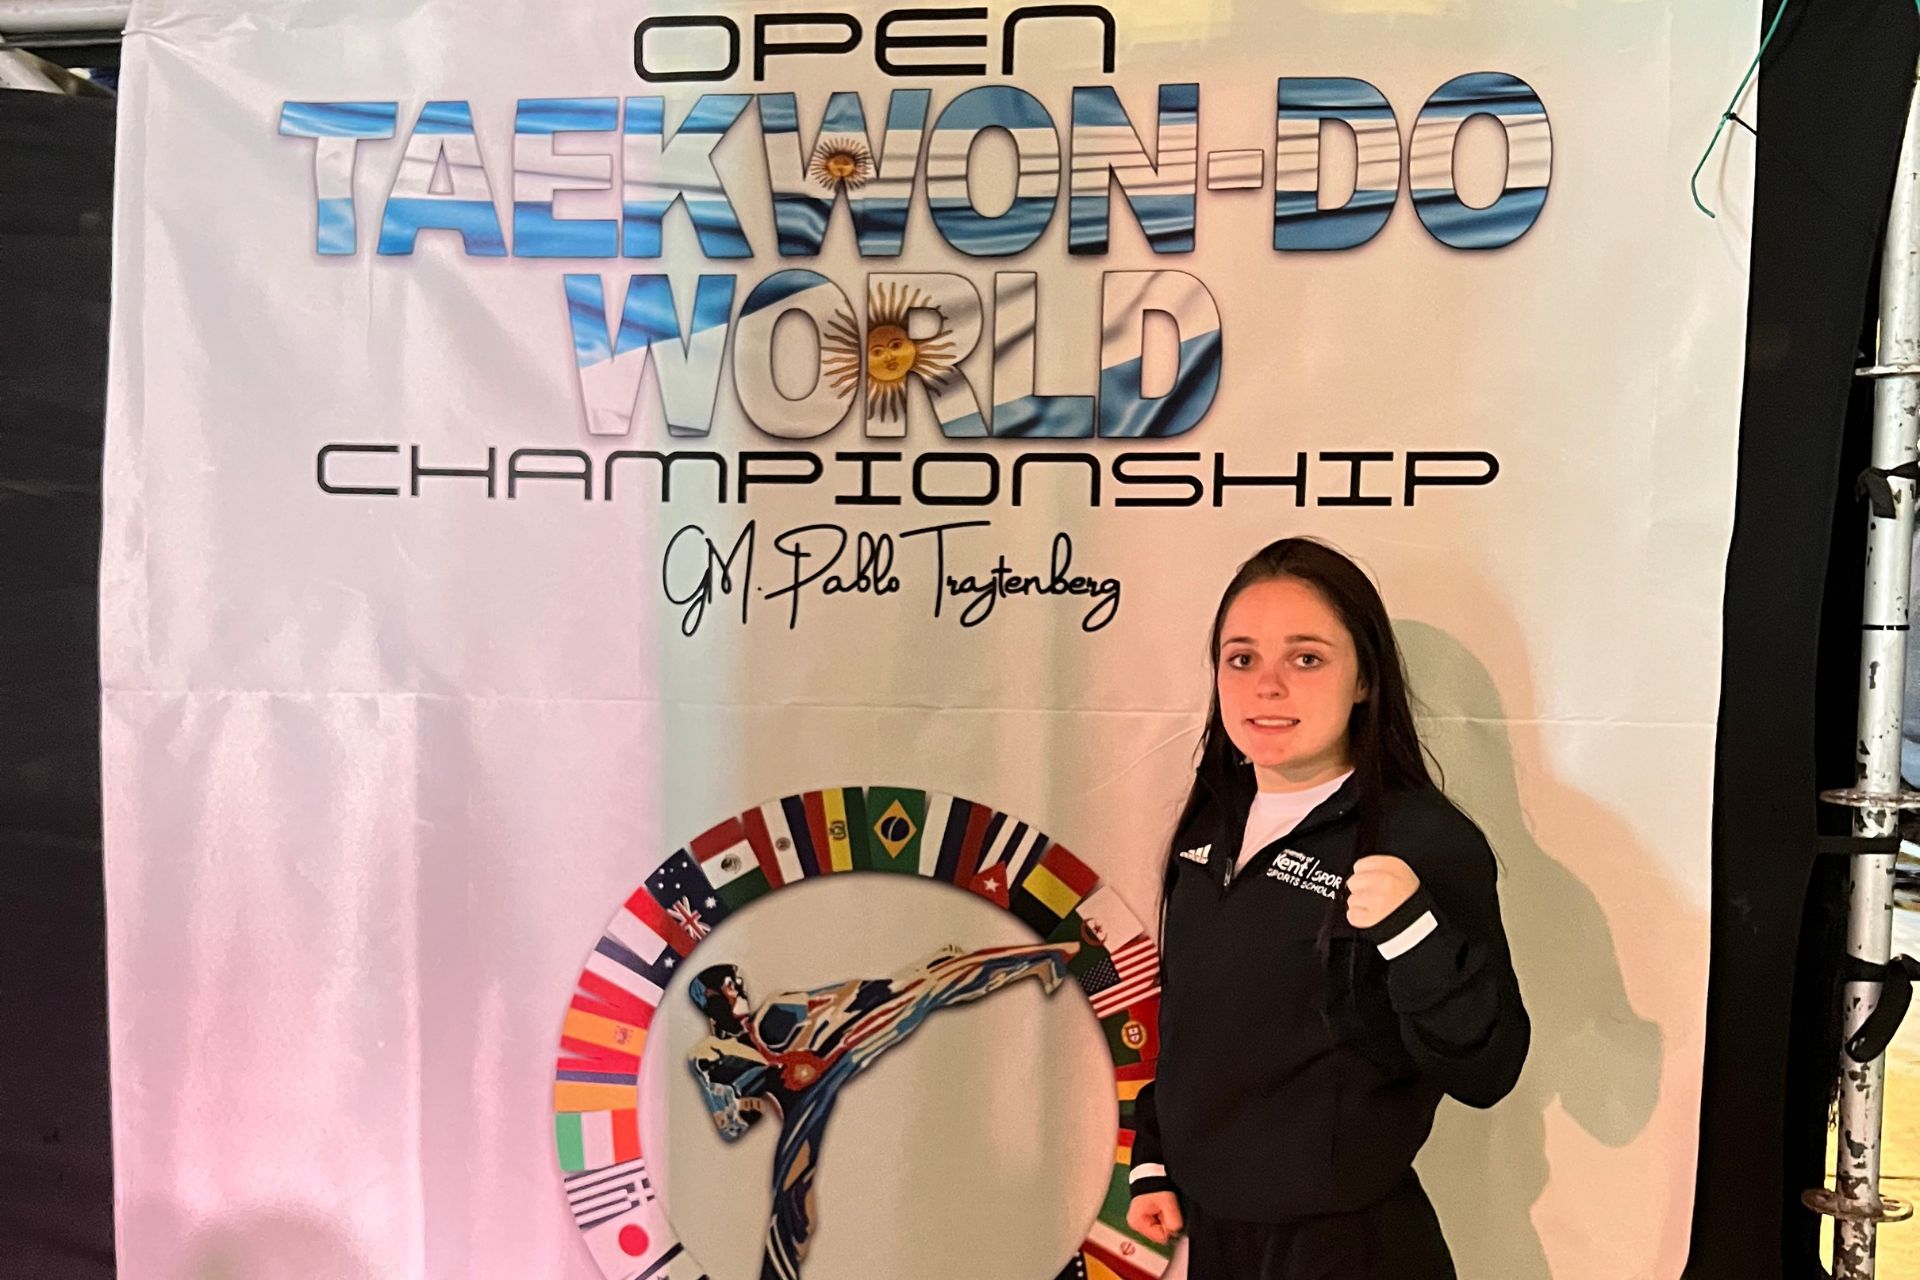 Emily standing in front of the Taekwondo World Championship's banner